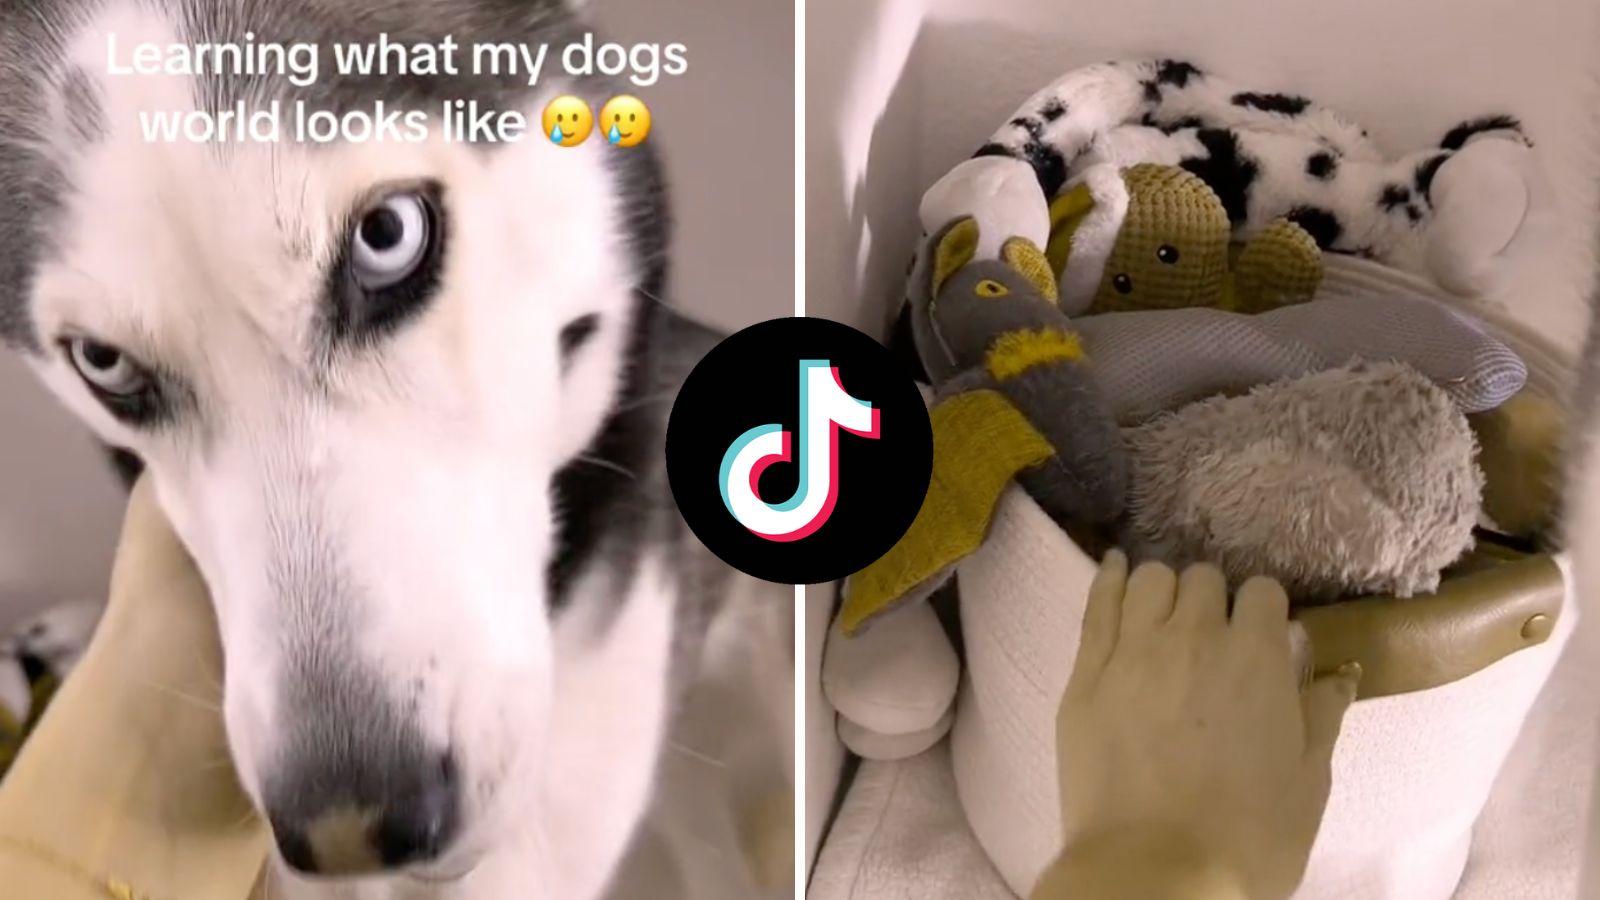 TikTok's Dog Vision filter applied over a video of a dog and her toys